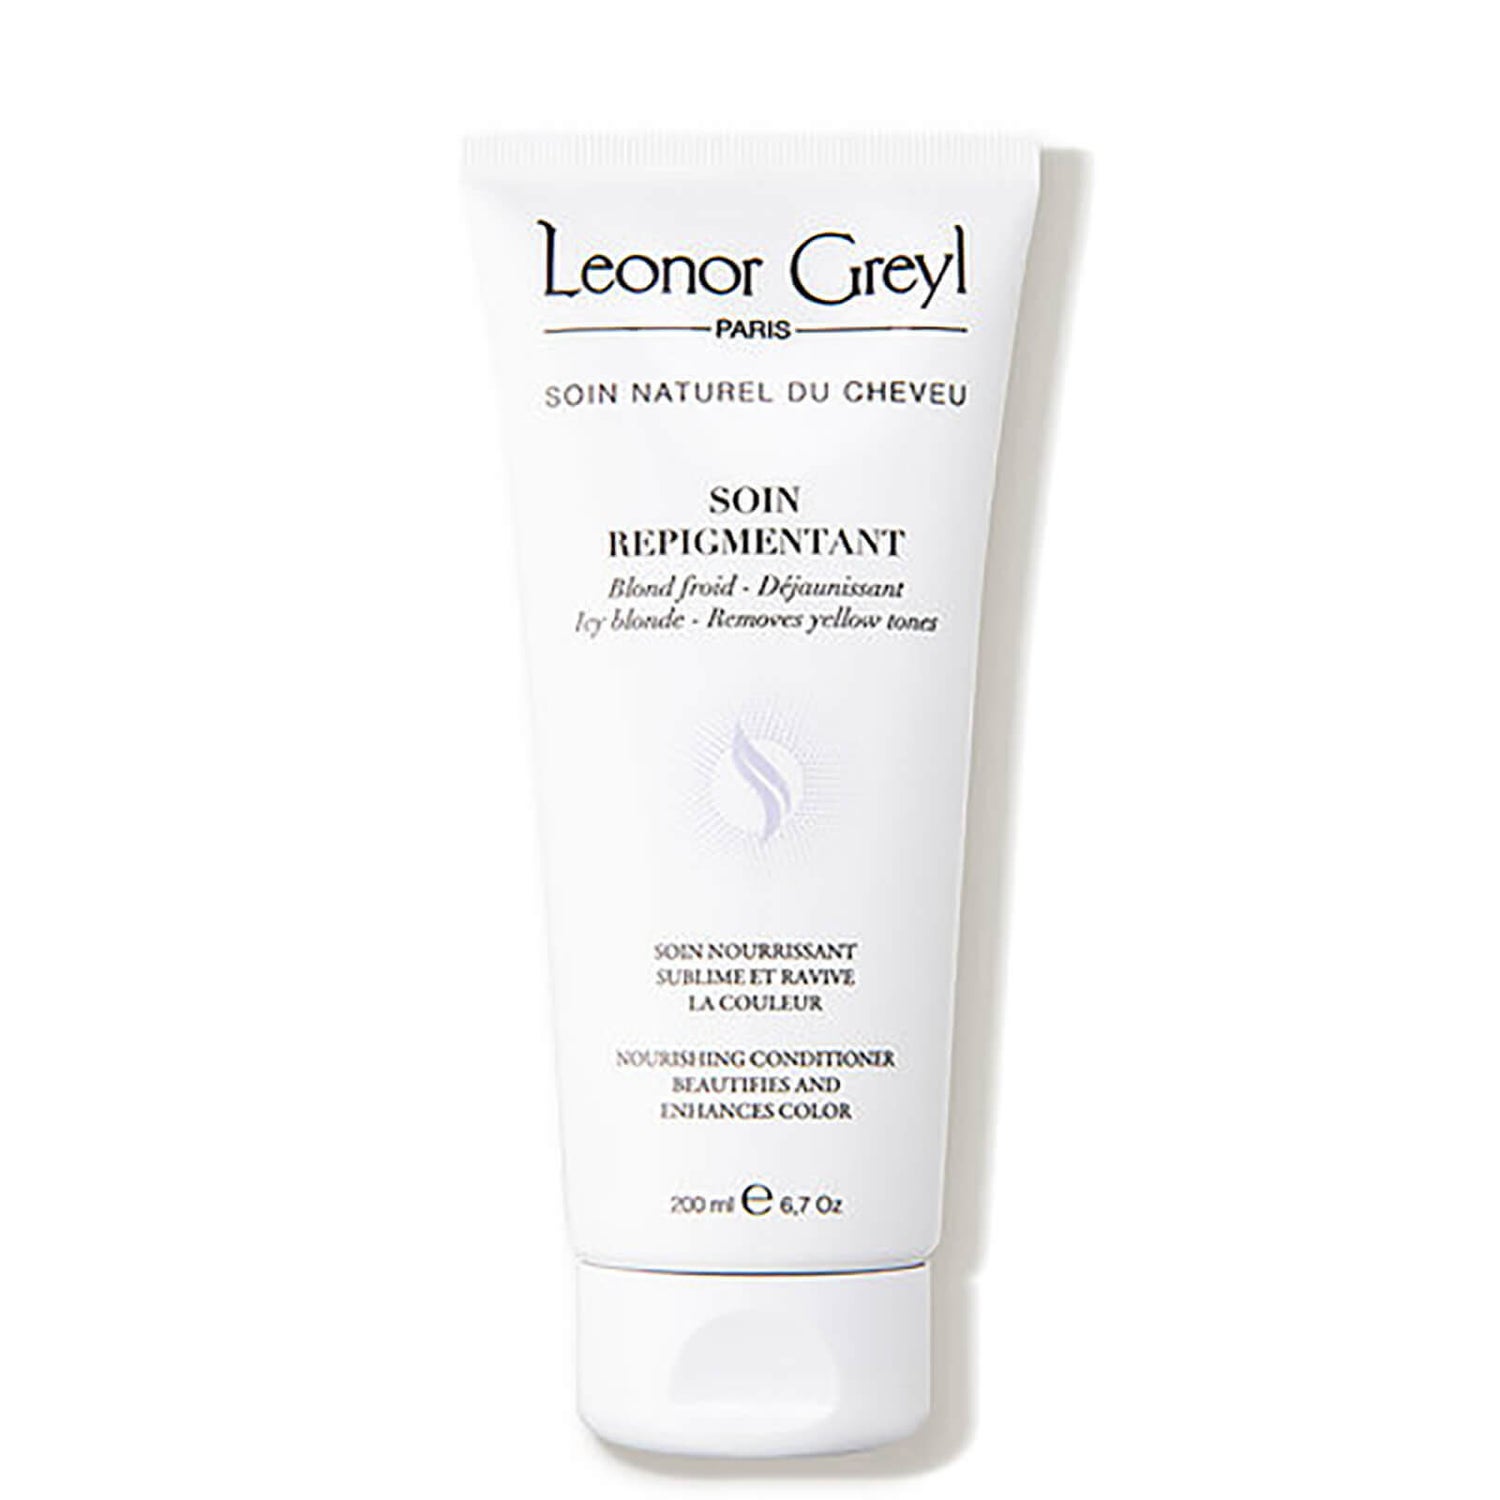 Leonor Greyl Soin Repigmentant Color-Enhancing and Nourishing Conditioner 6.7 oz.